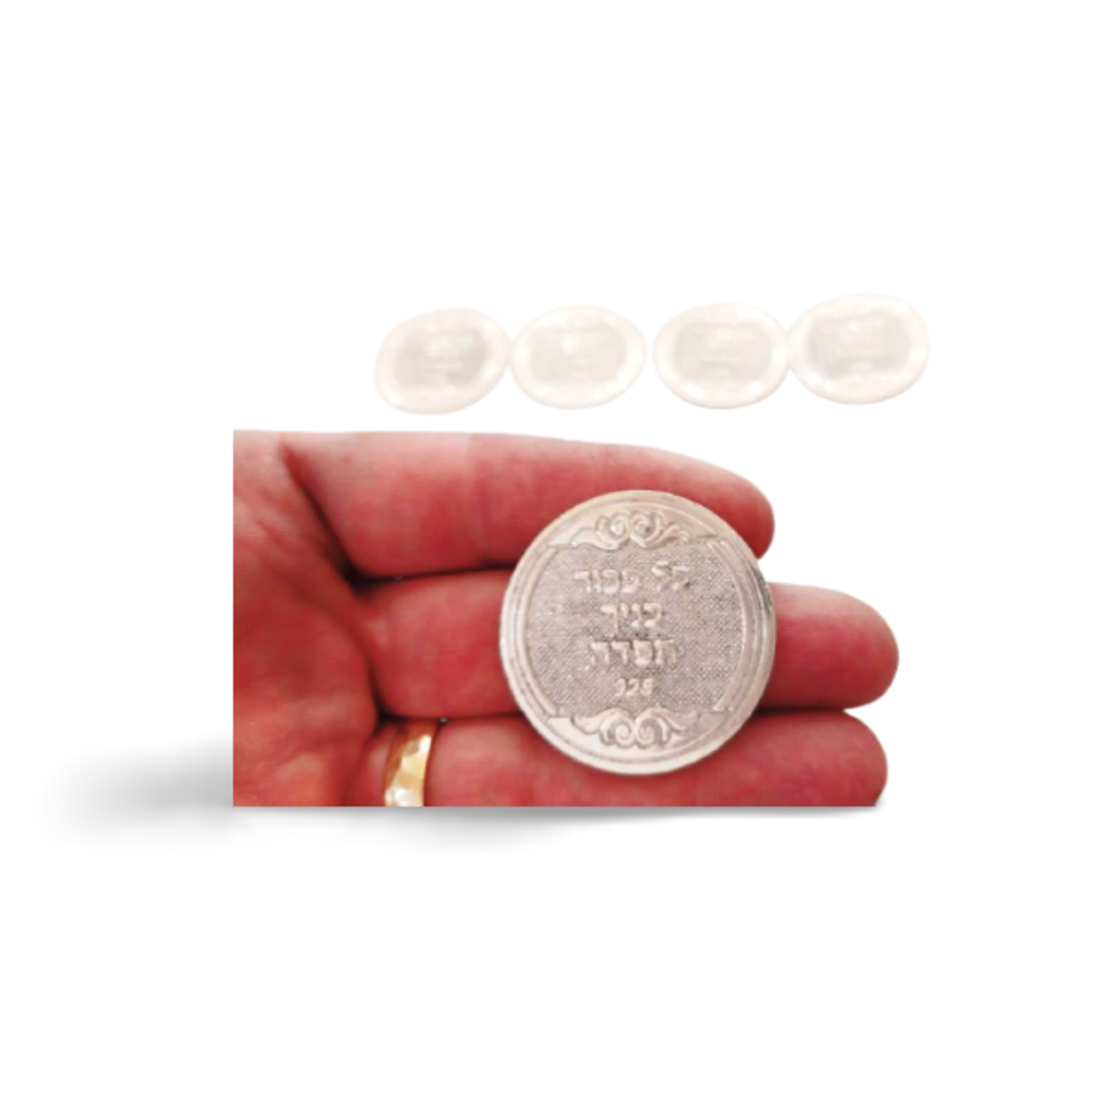 Set of coins for redeeming the son pure silver